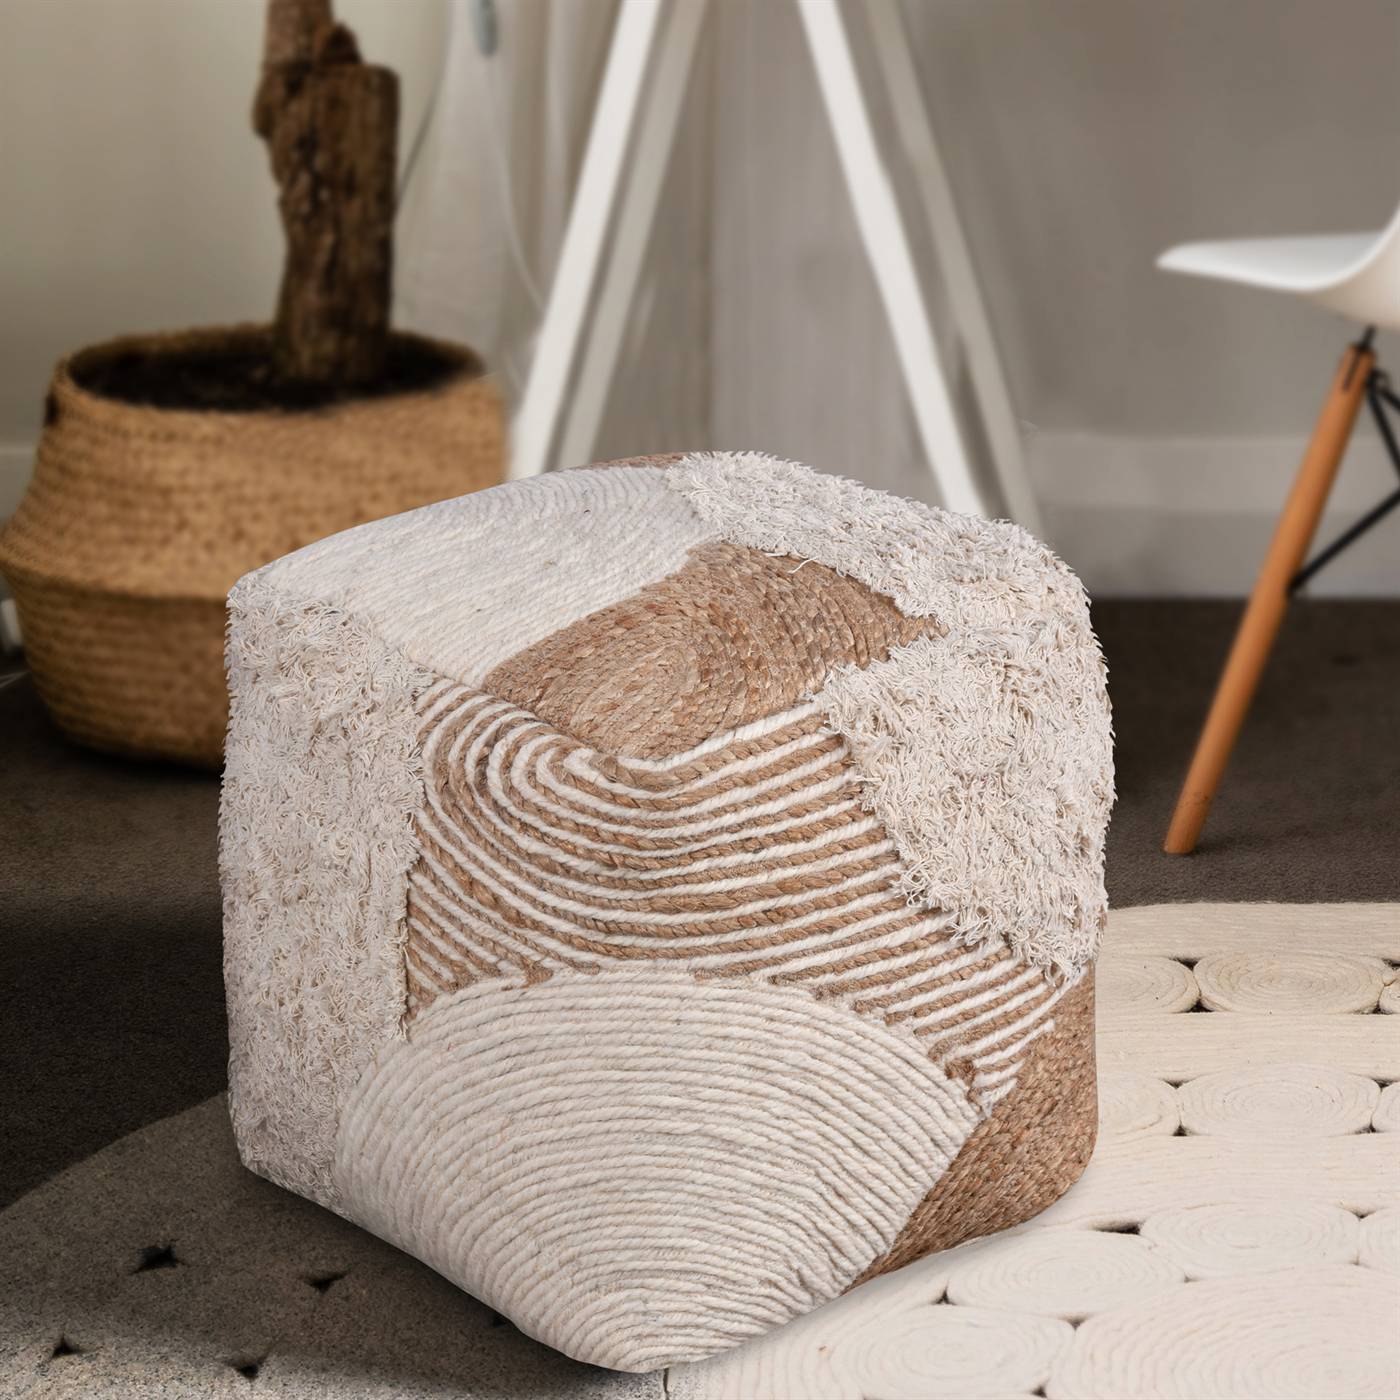 Dinsmore Pouf, 40x40x40 cm, Natural, Natural White, Jute, Wool, Cotton Salvage, Hand Made, Hm Stitching, Flat Weave